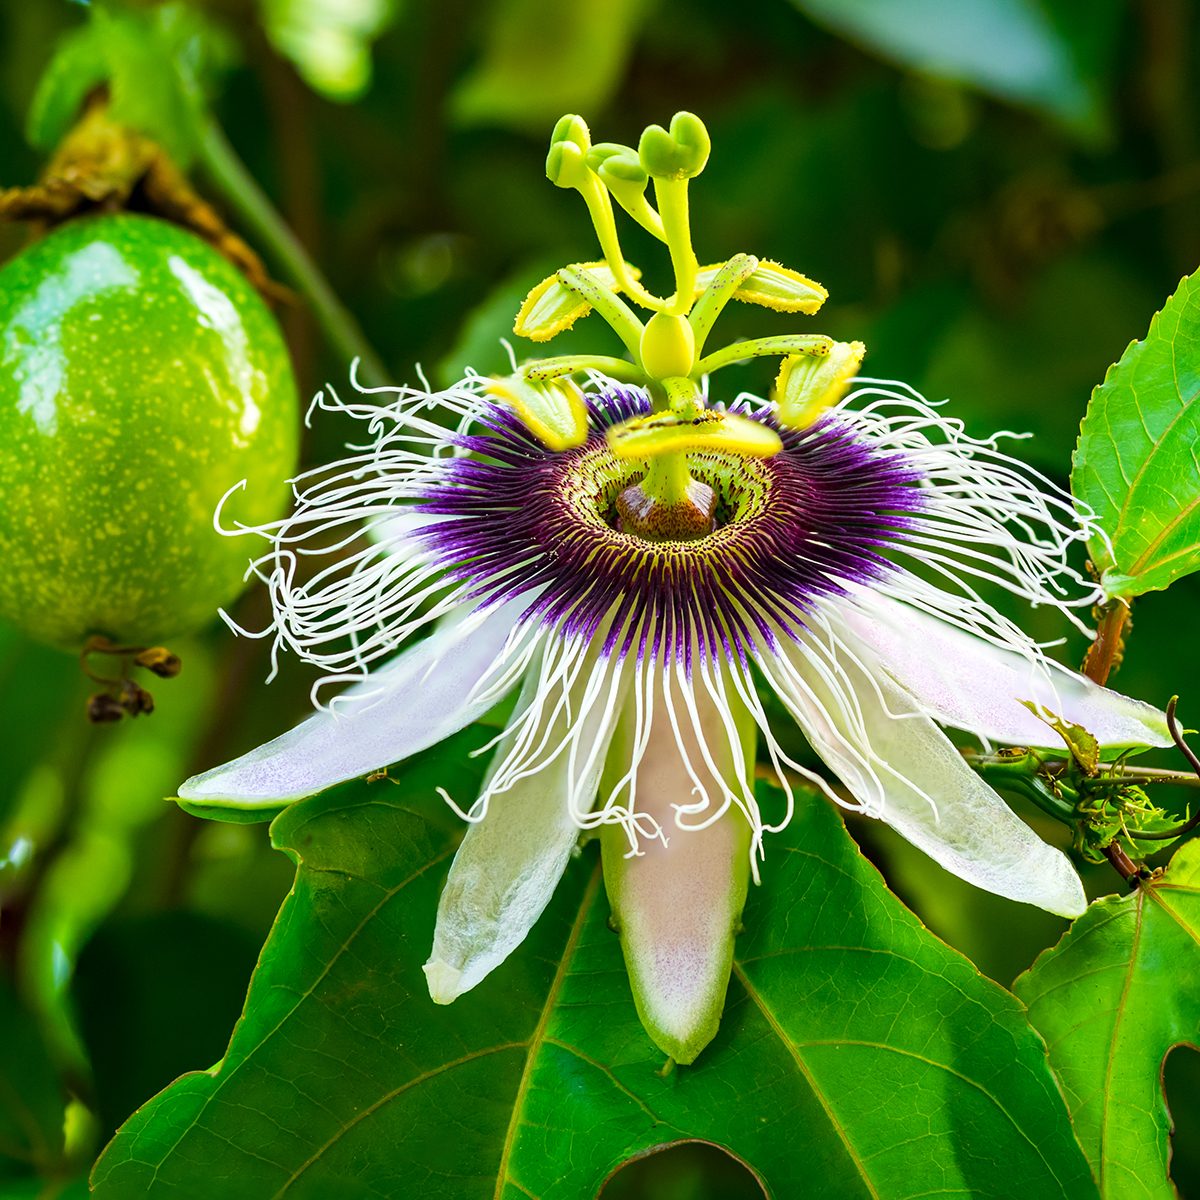 Passion fruit and flower on a vine